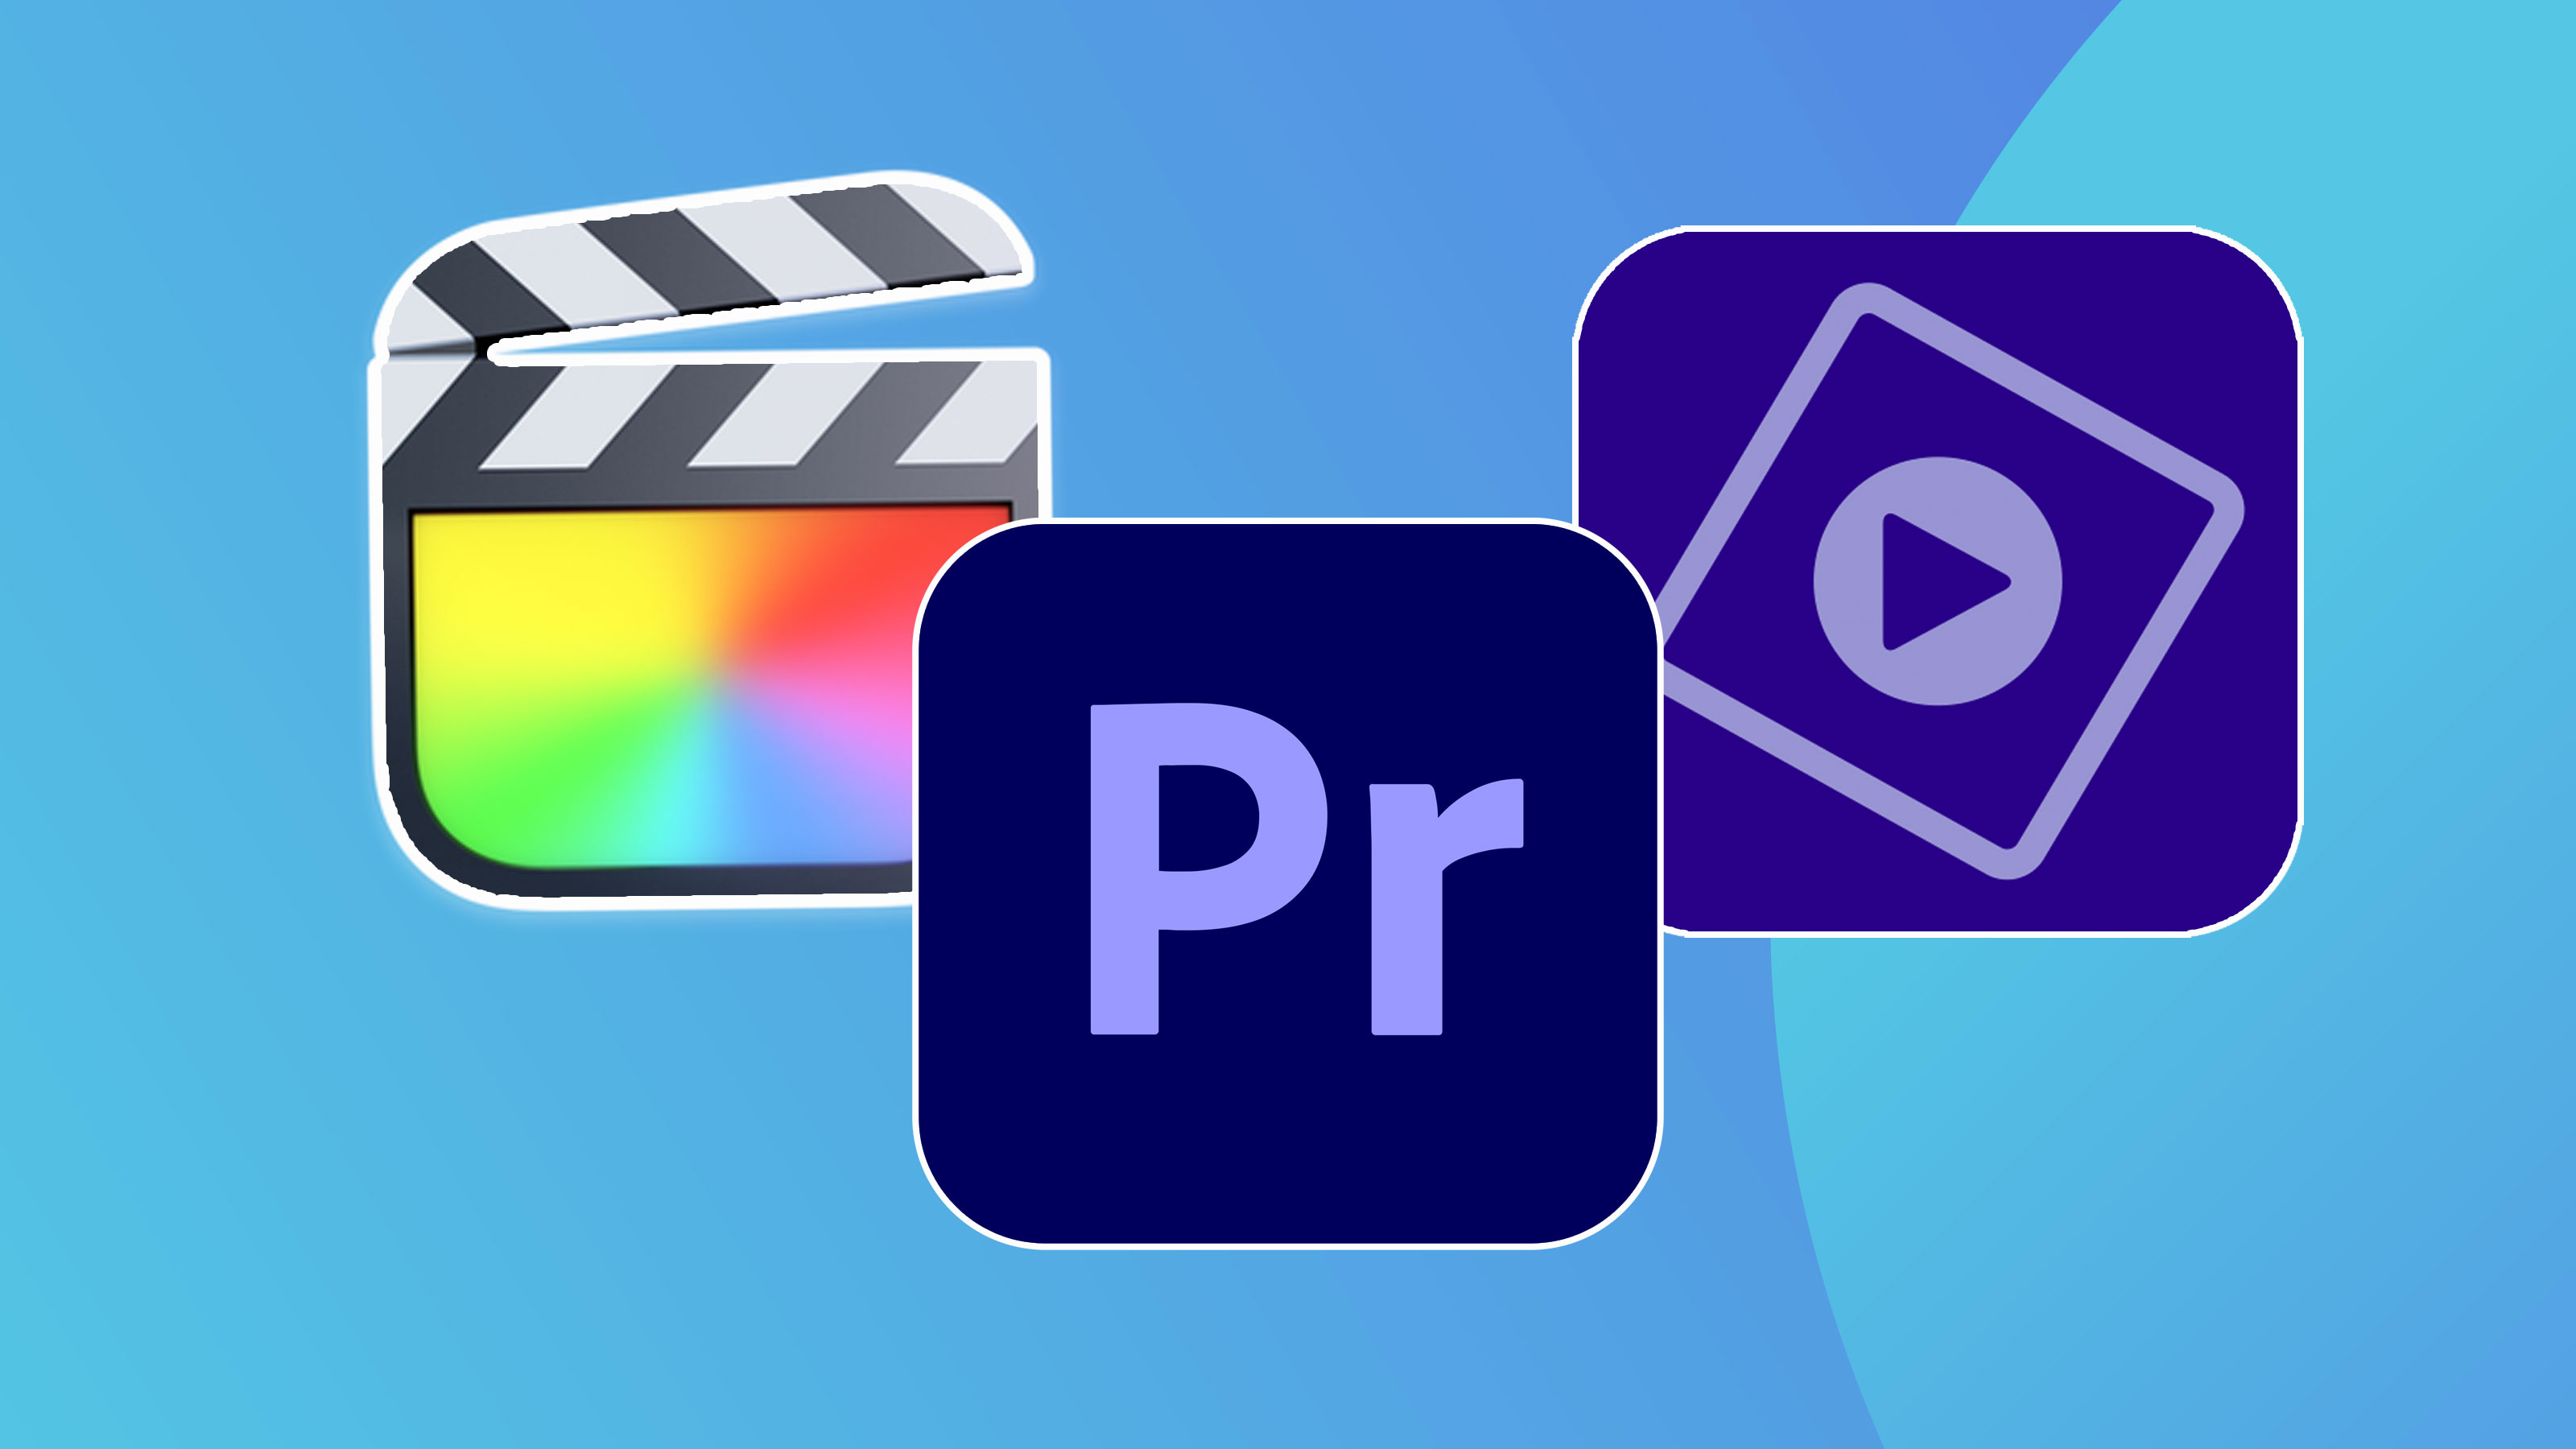 The Best Game Video Recording and Editing Software for Beginners